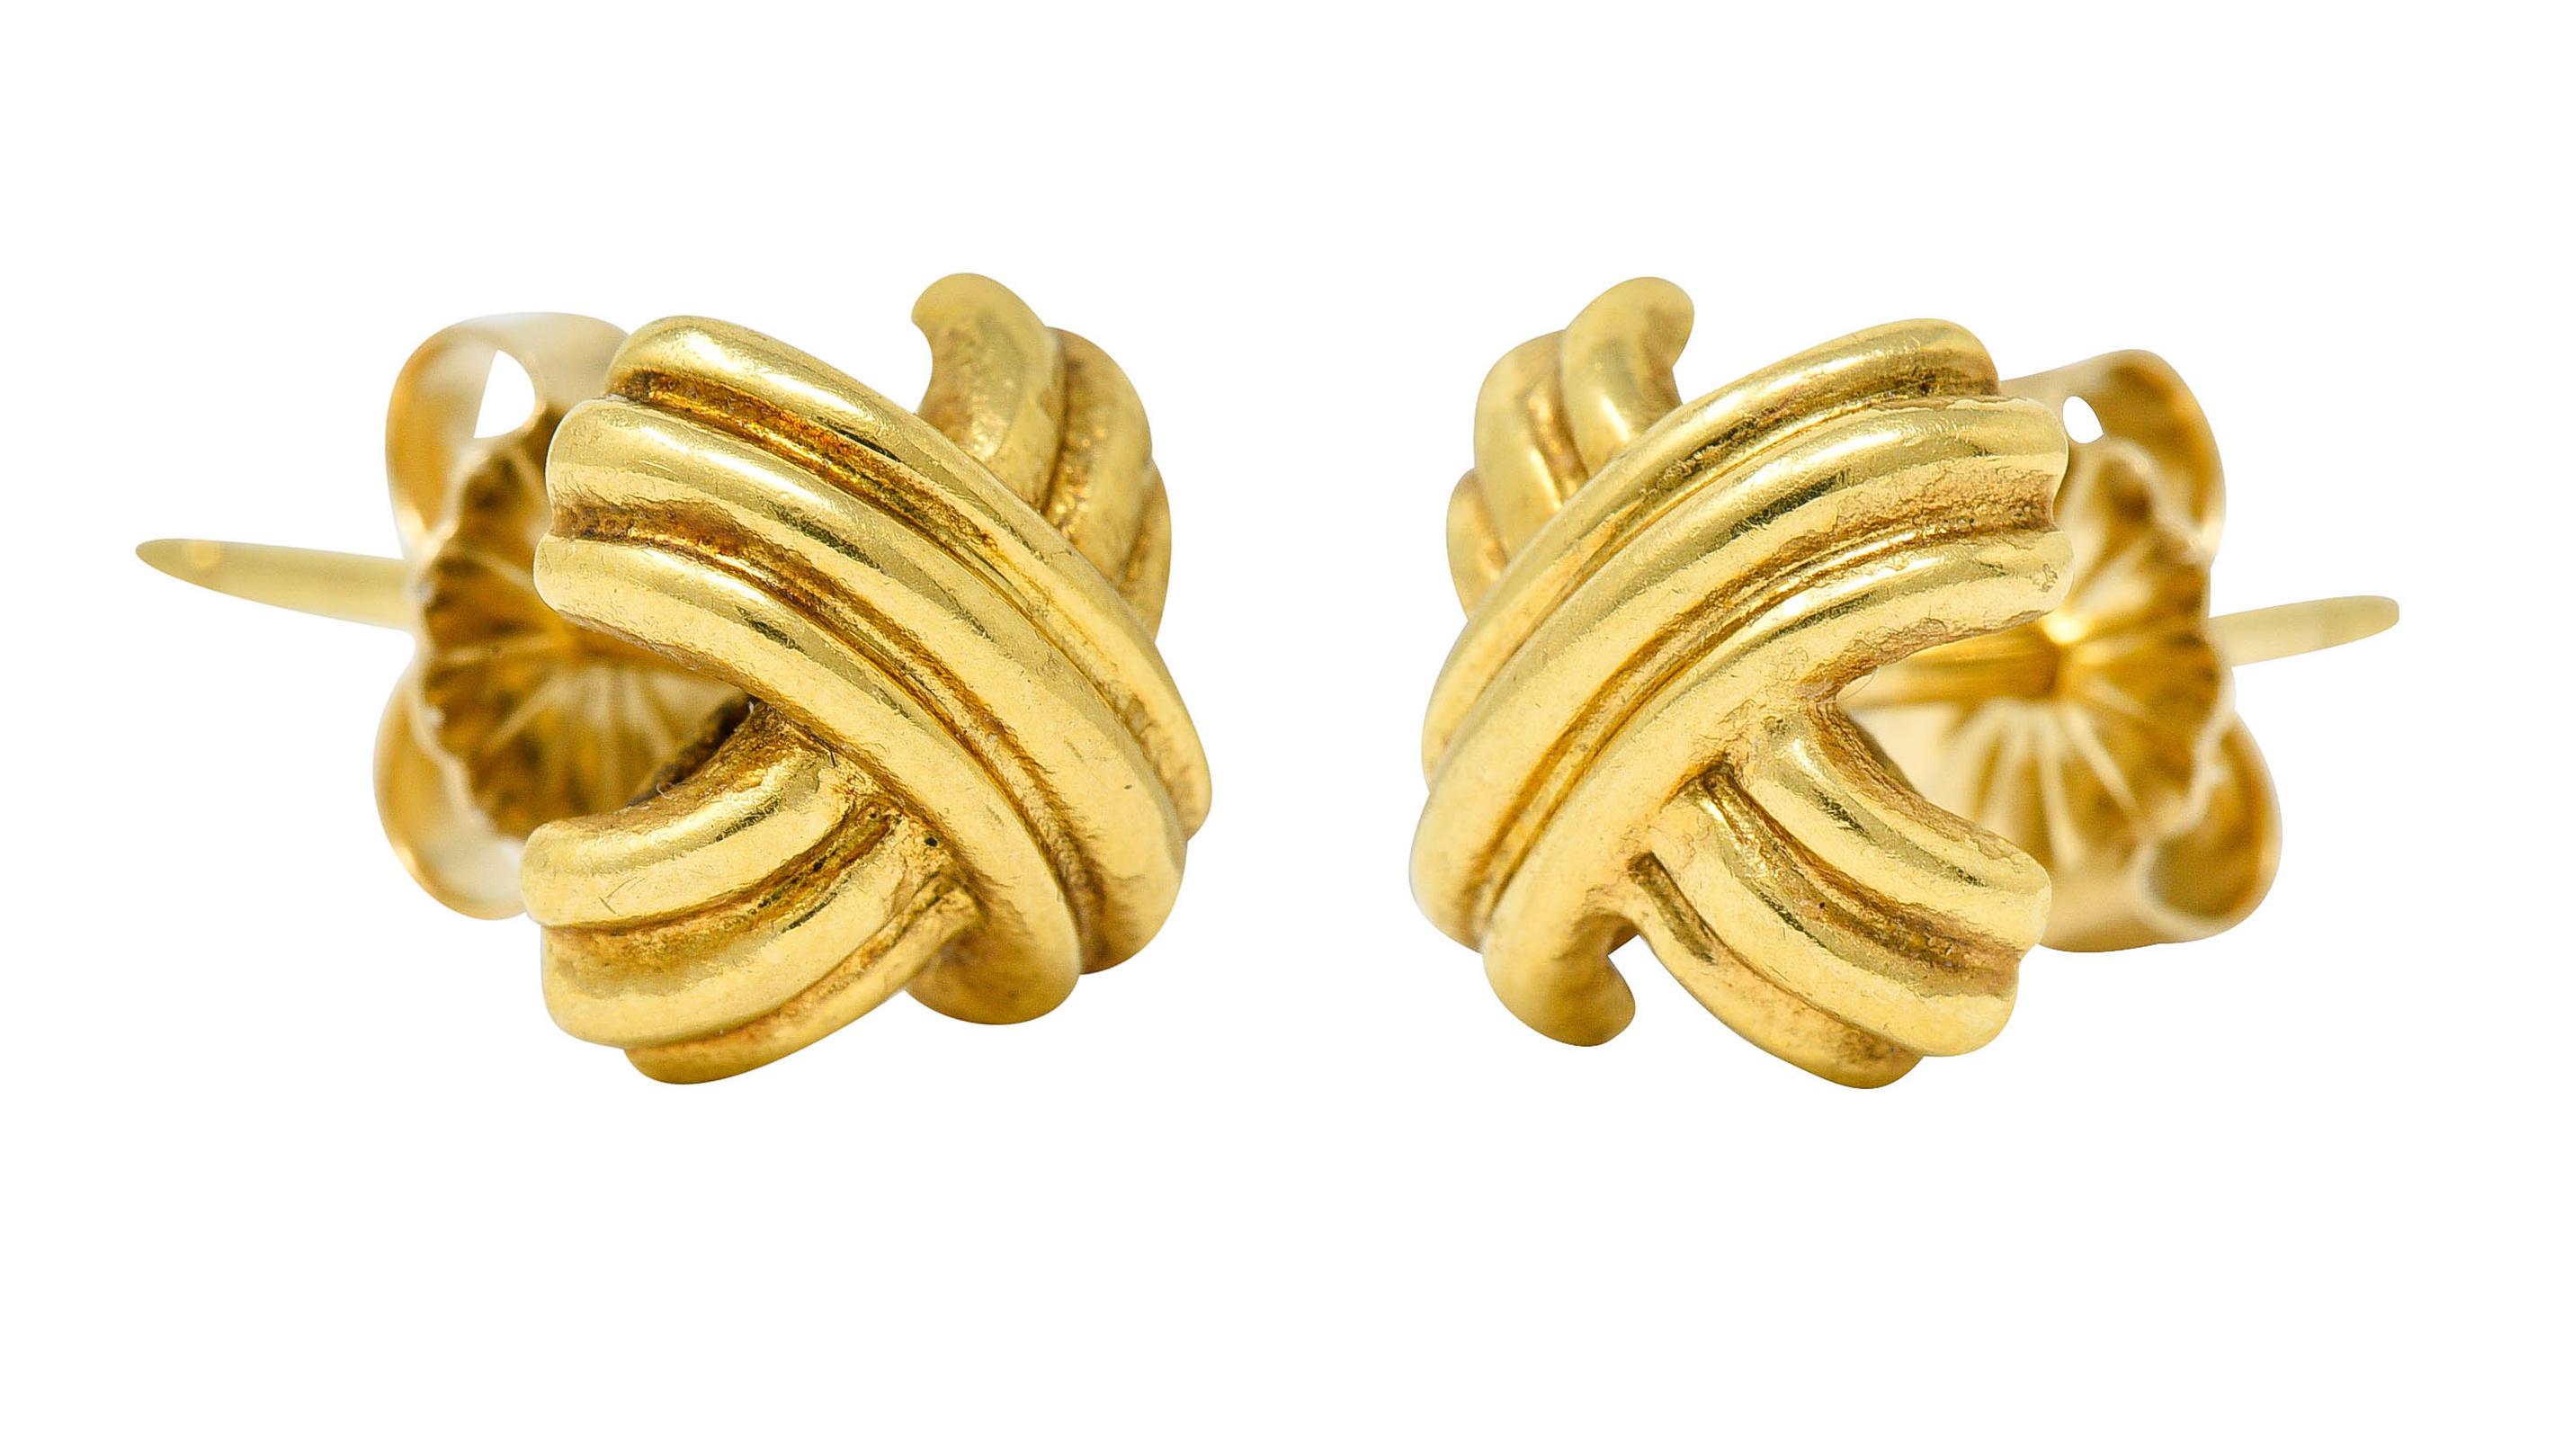 Stud earrings are designed as a deeply ridged X

With a brightly polished finish

Completed by posts and friction backs

Stamped 750 for 18 karat gold

Signed T & Co. for Tiffany & Co.

Circa: 1990s

Measures: 3/8 x 3/8 inch

Total weight: 3.2